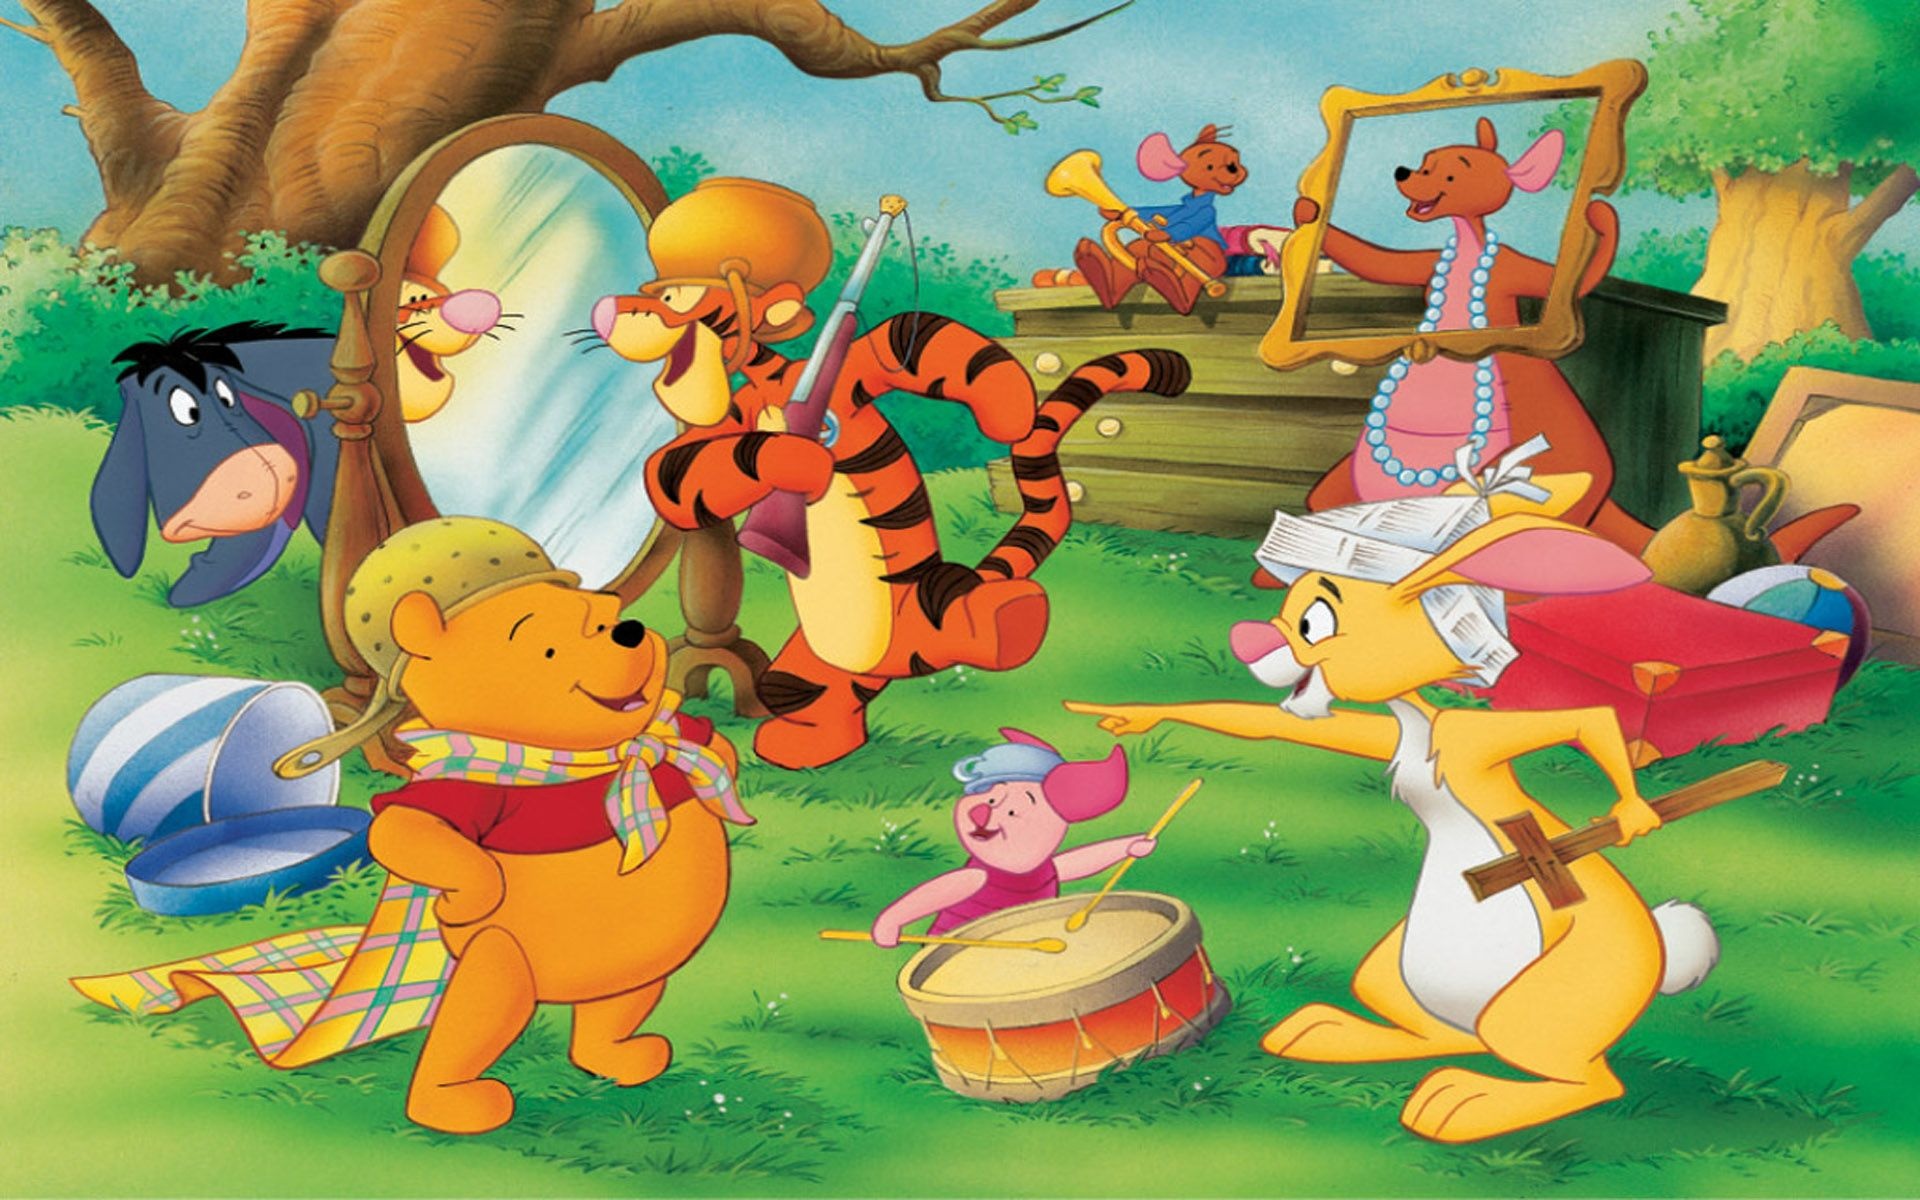 Winnie the Pooh, Character wallpapers, Playful imagery, Delightful nostalgia, 1920x1200 HD Desktop